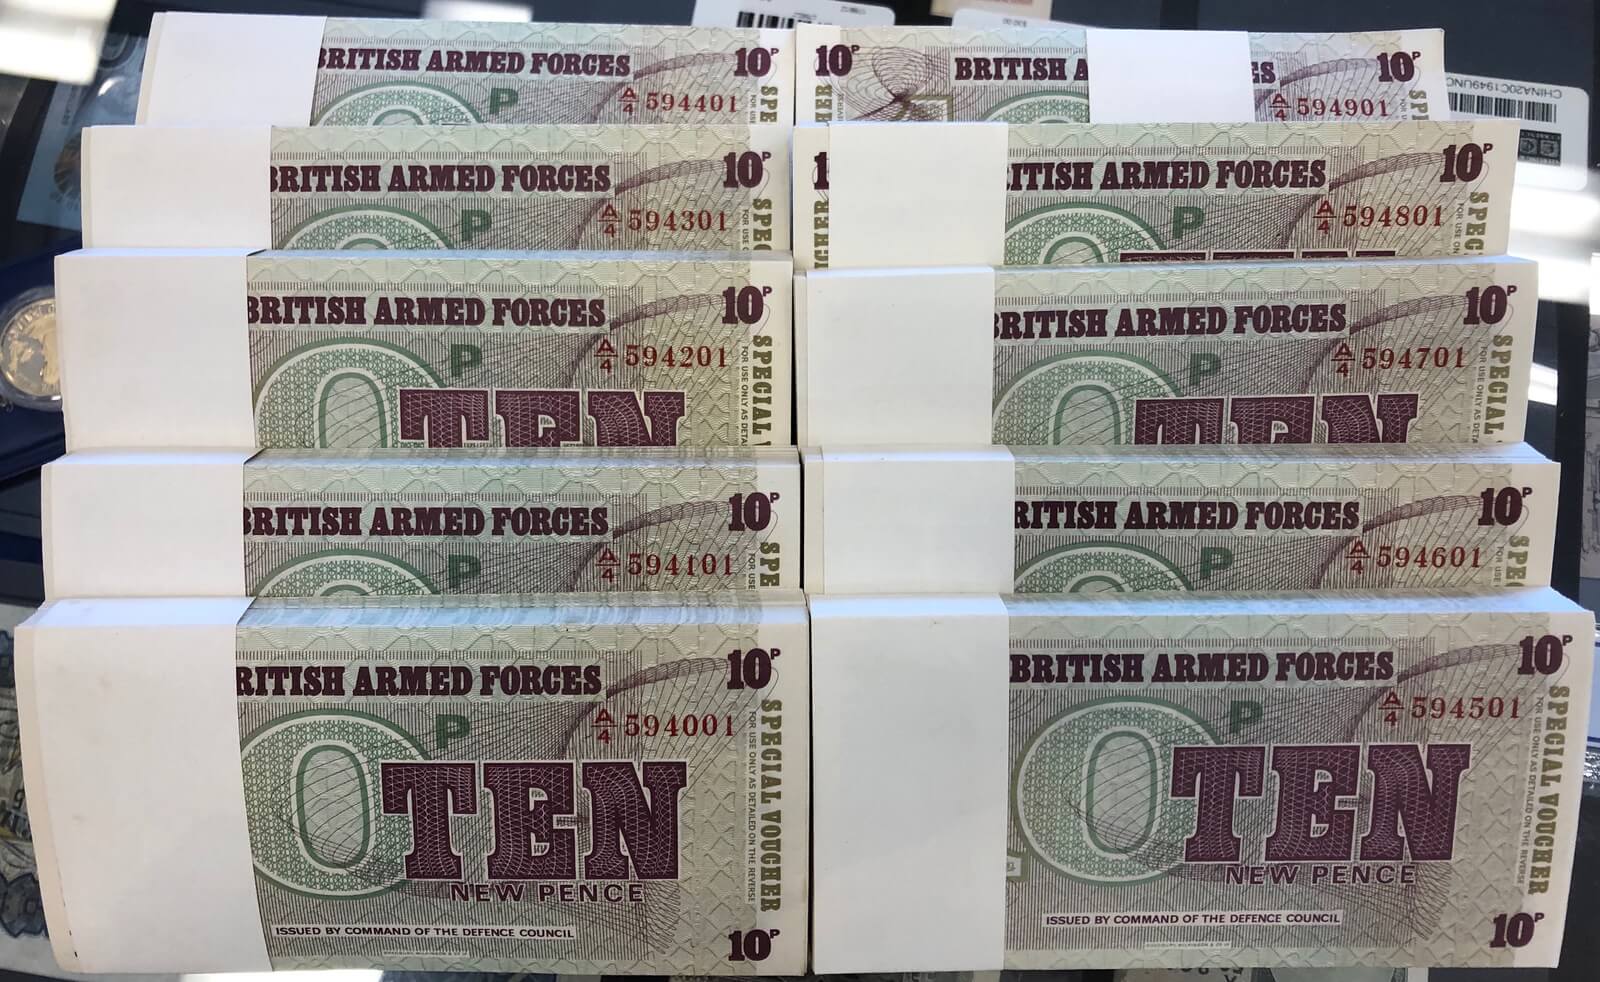 British Armed Forces Ten New Pence (Ten Consecutive Bundles of 100 Notes) 6th Series / 1972 P# M48 Uncirculated product image